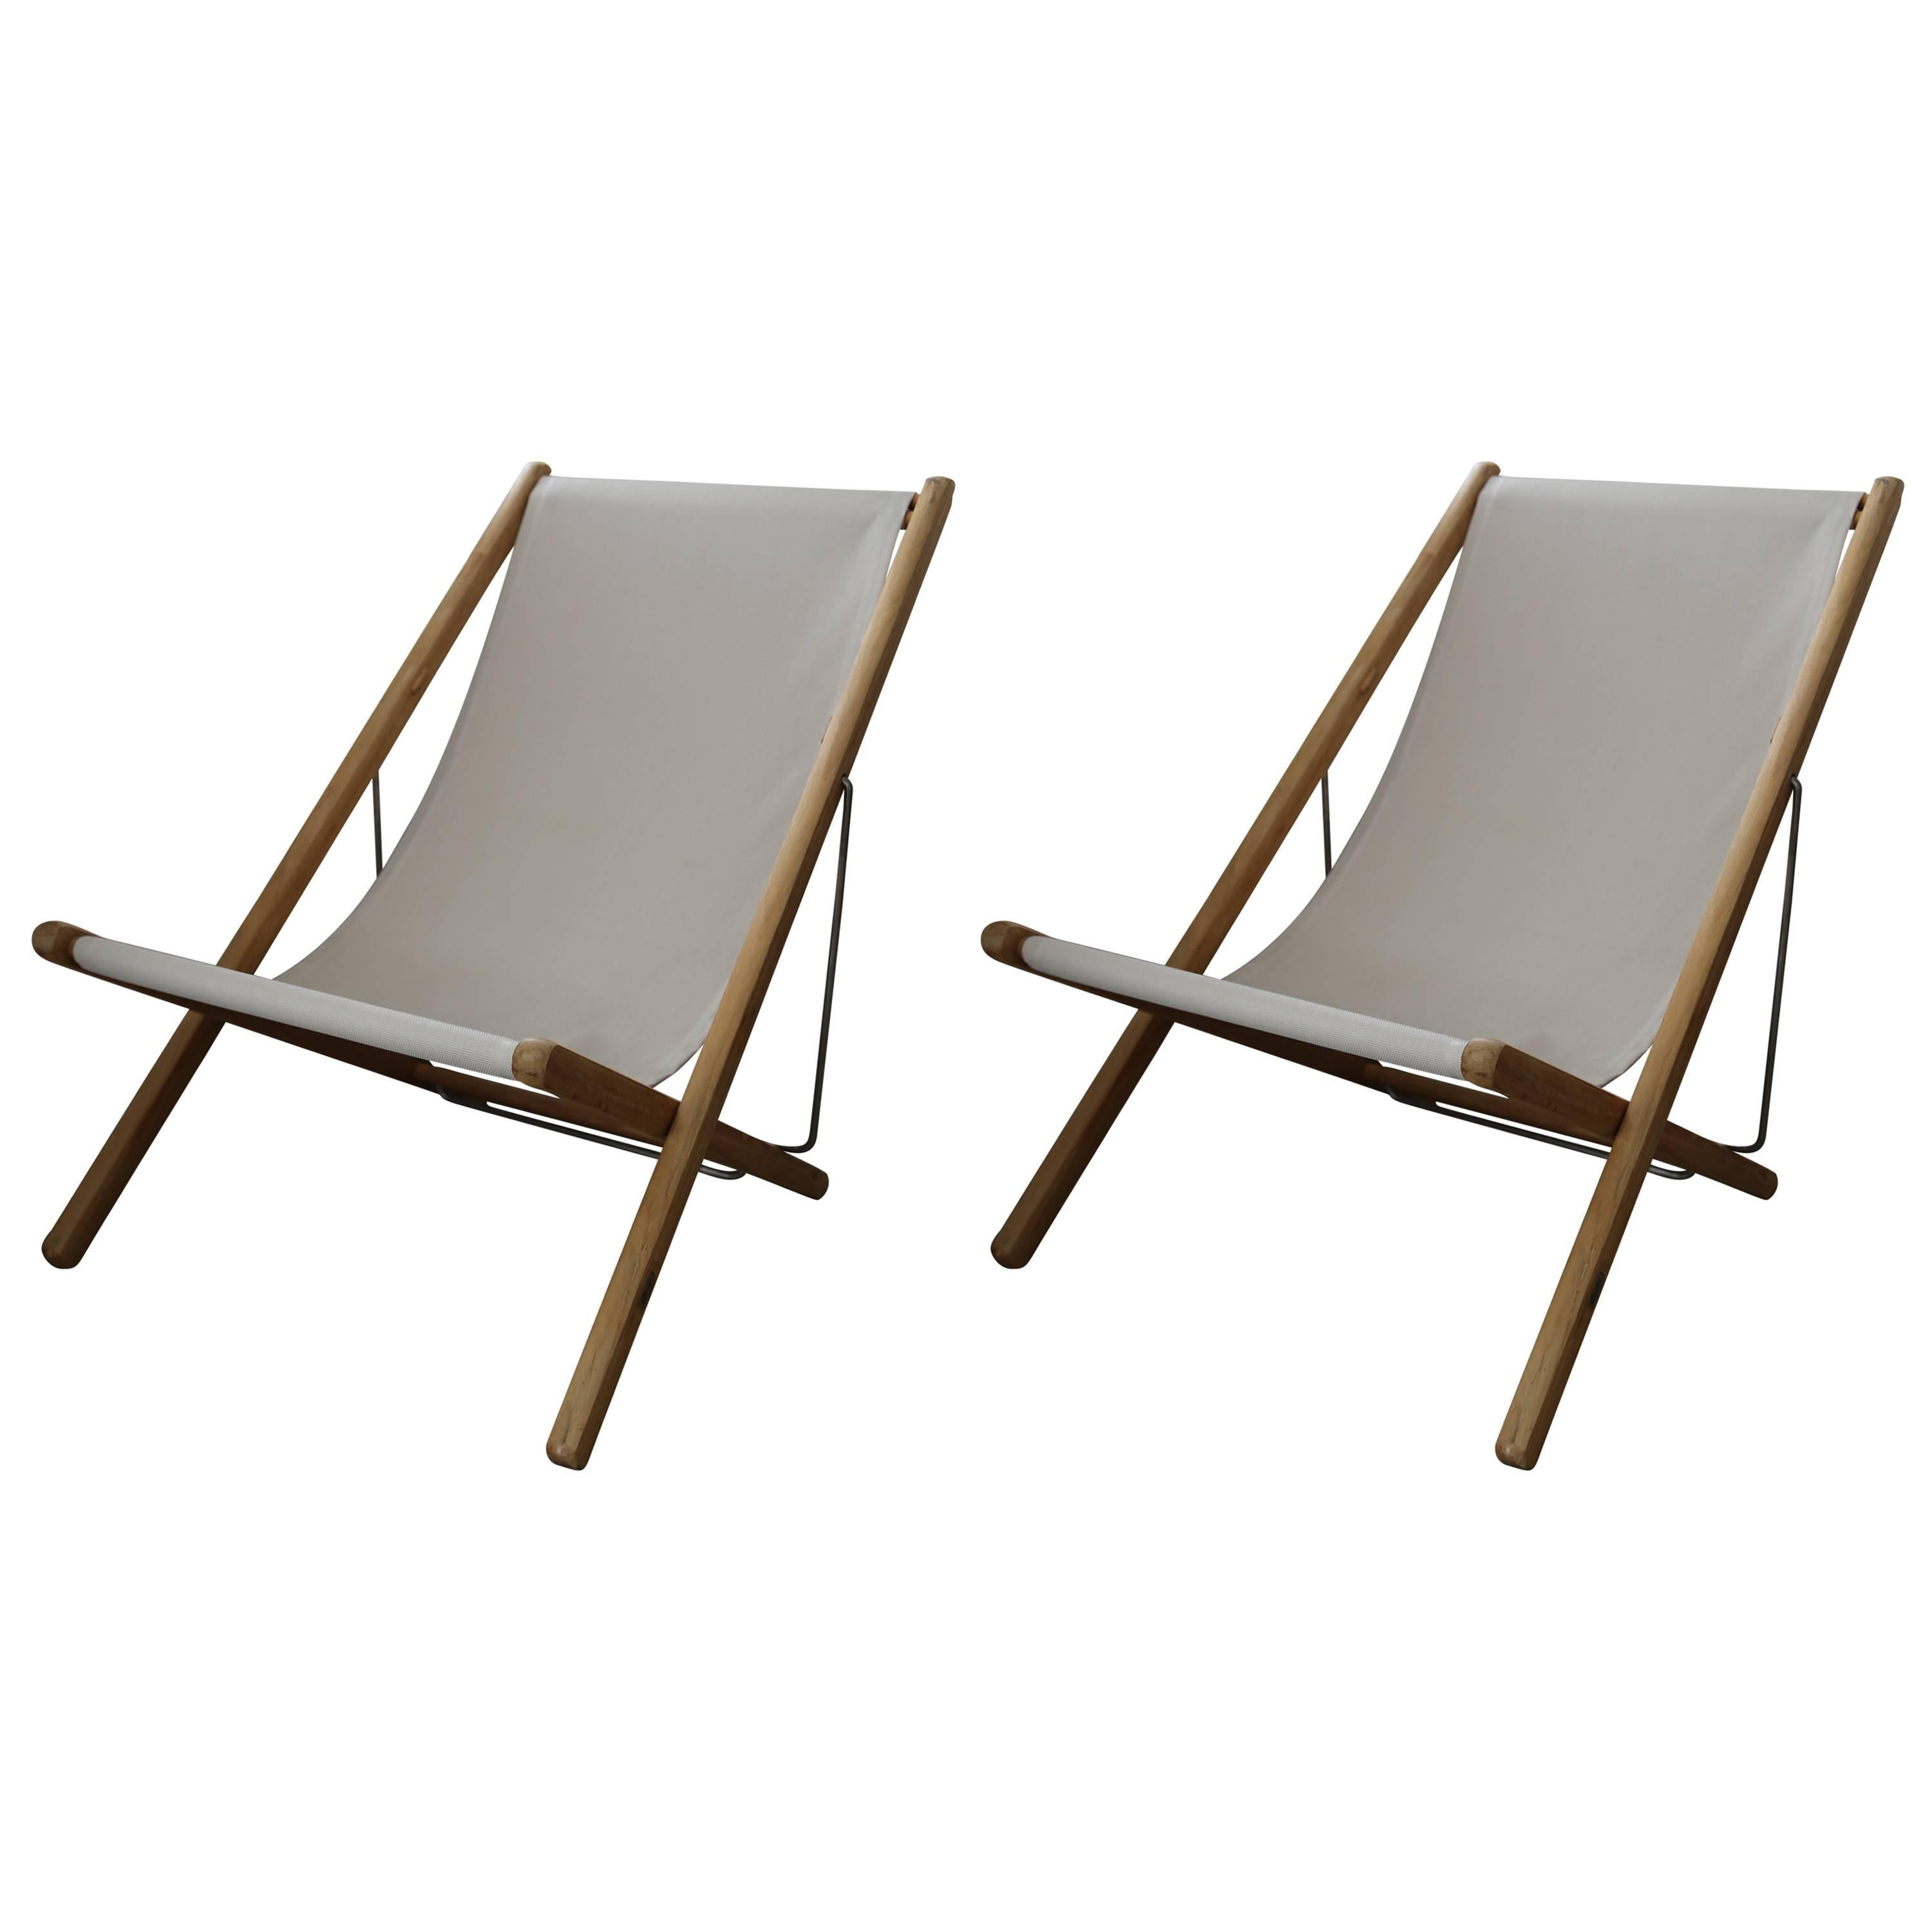  Teak Folding Chairs by Gloster